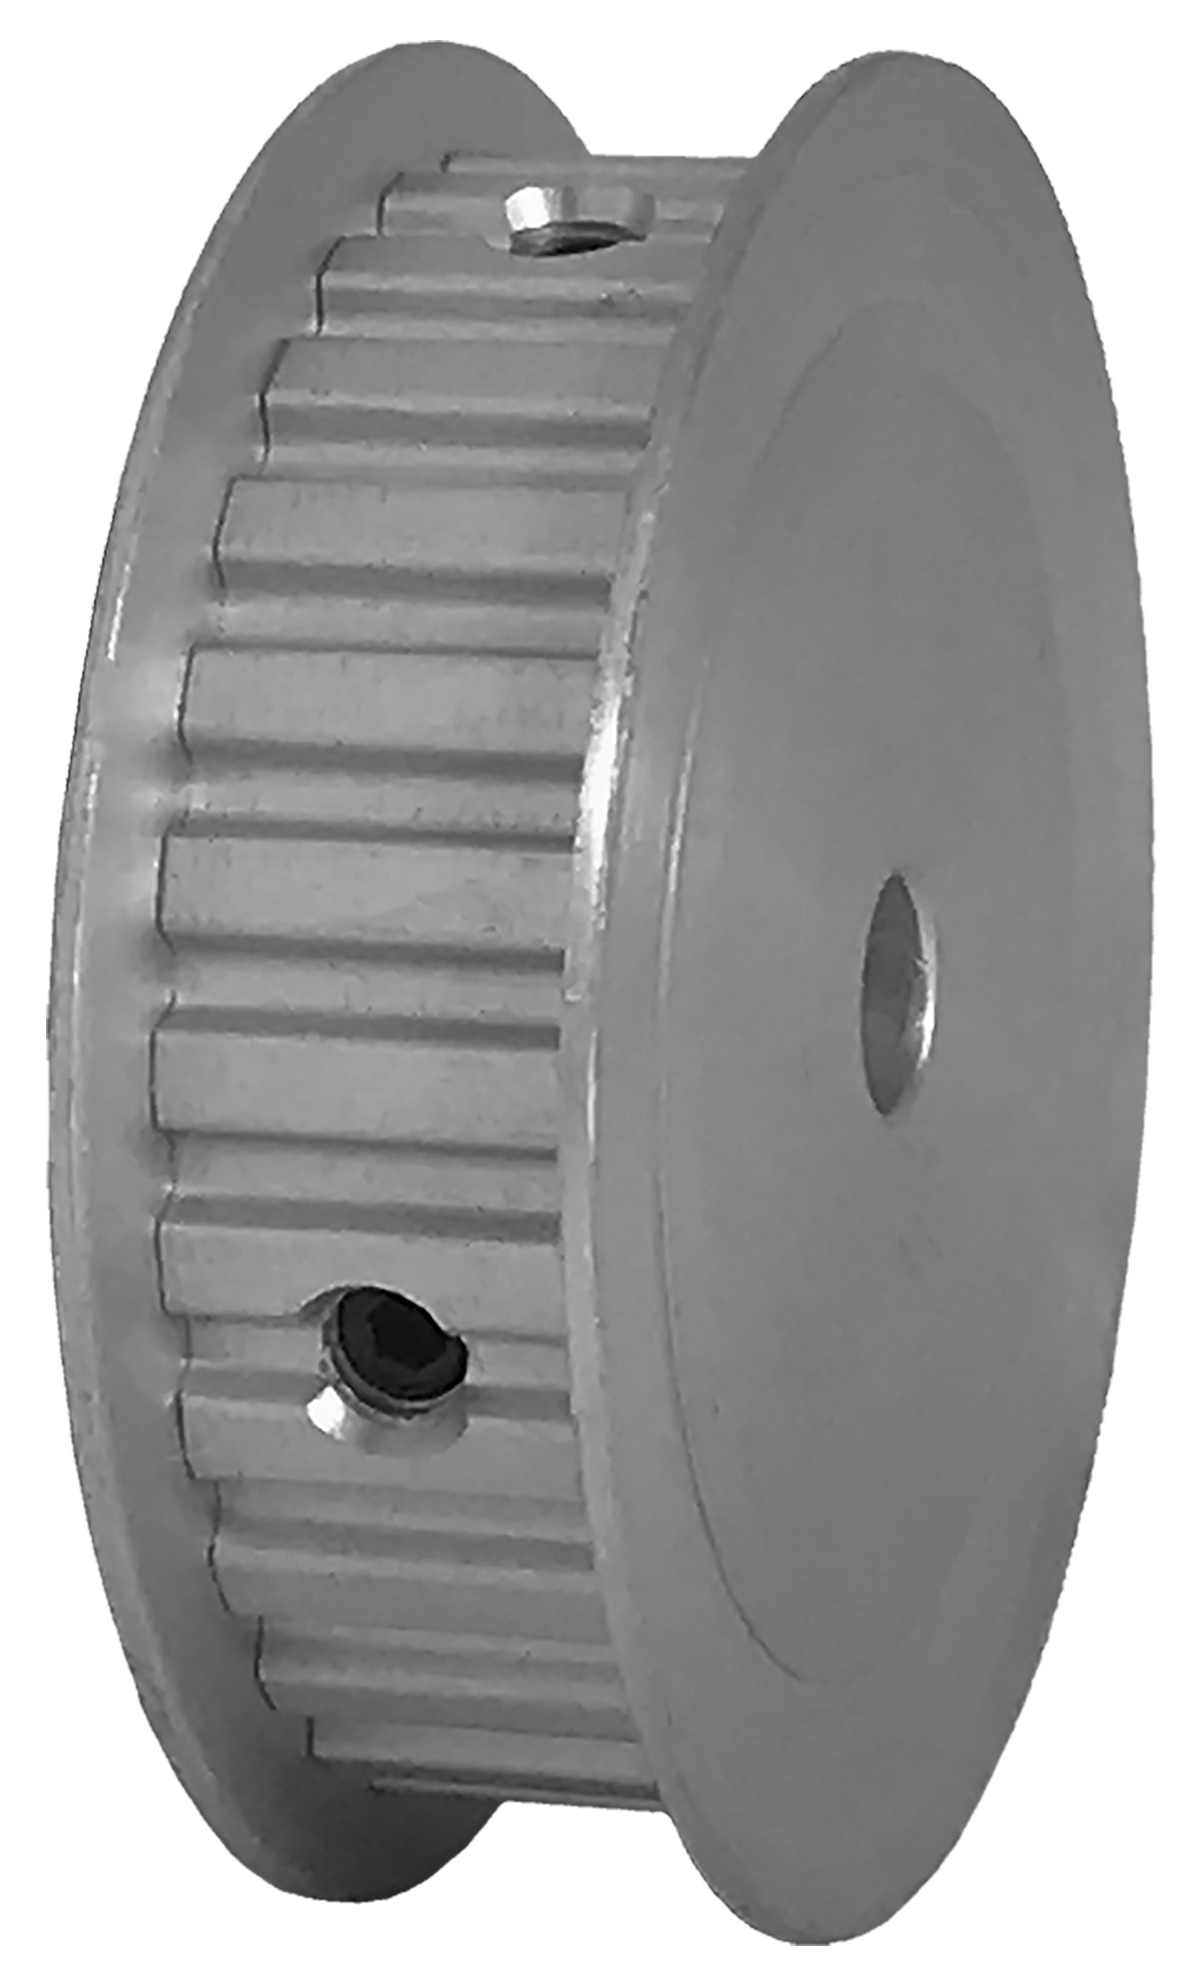 28XL037-3FA3 - Aluminum Imperial Pitch Pulleys